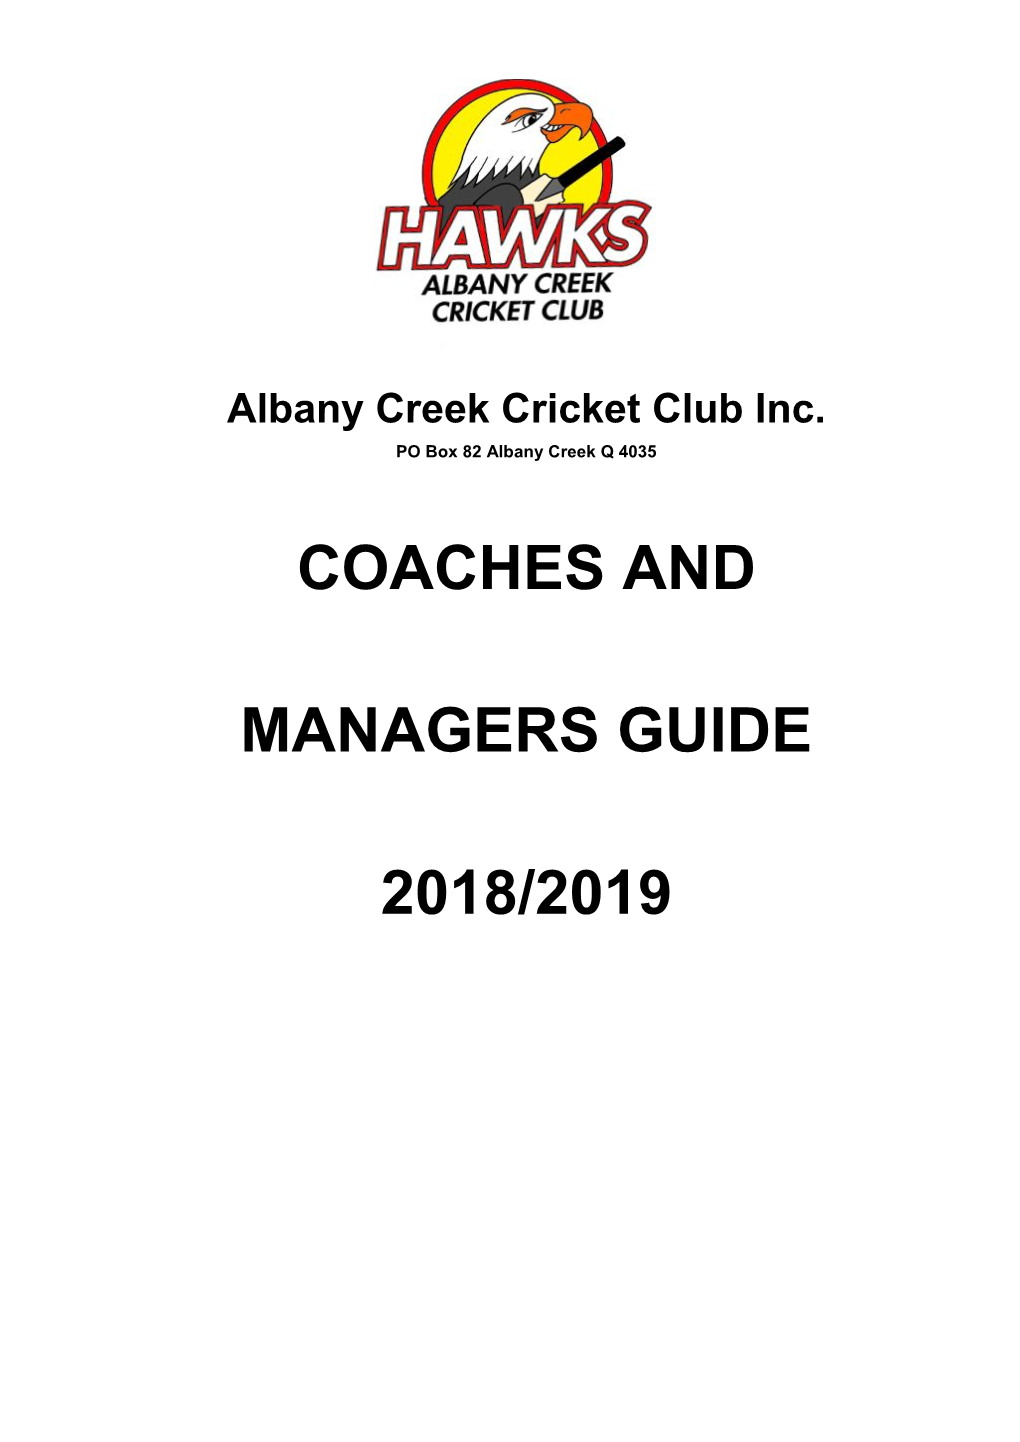 Coaches and Managers Guide 2018/2019